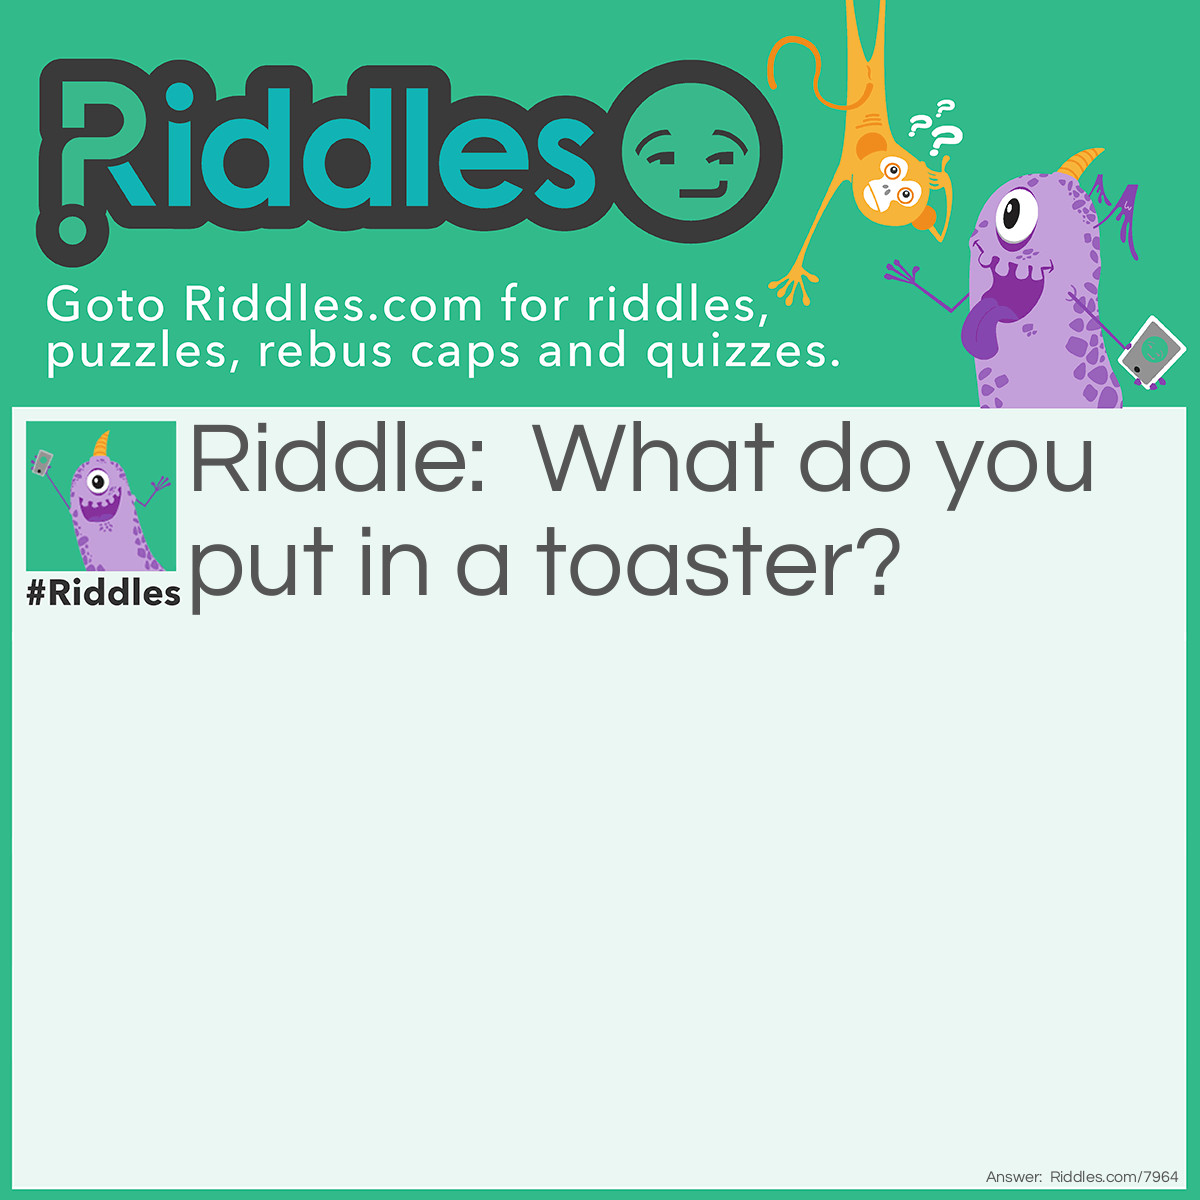 Riddle: What do you put in a toaster? Answer: Bread.